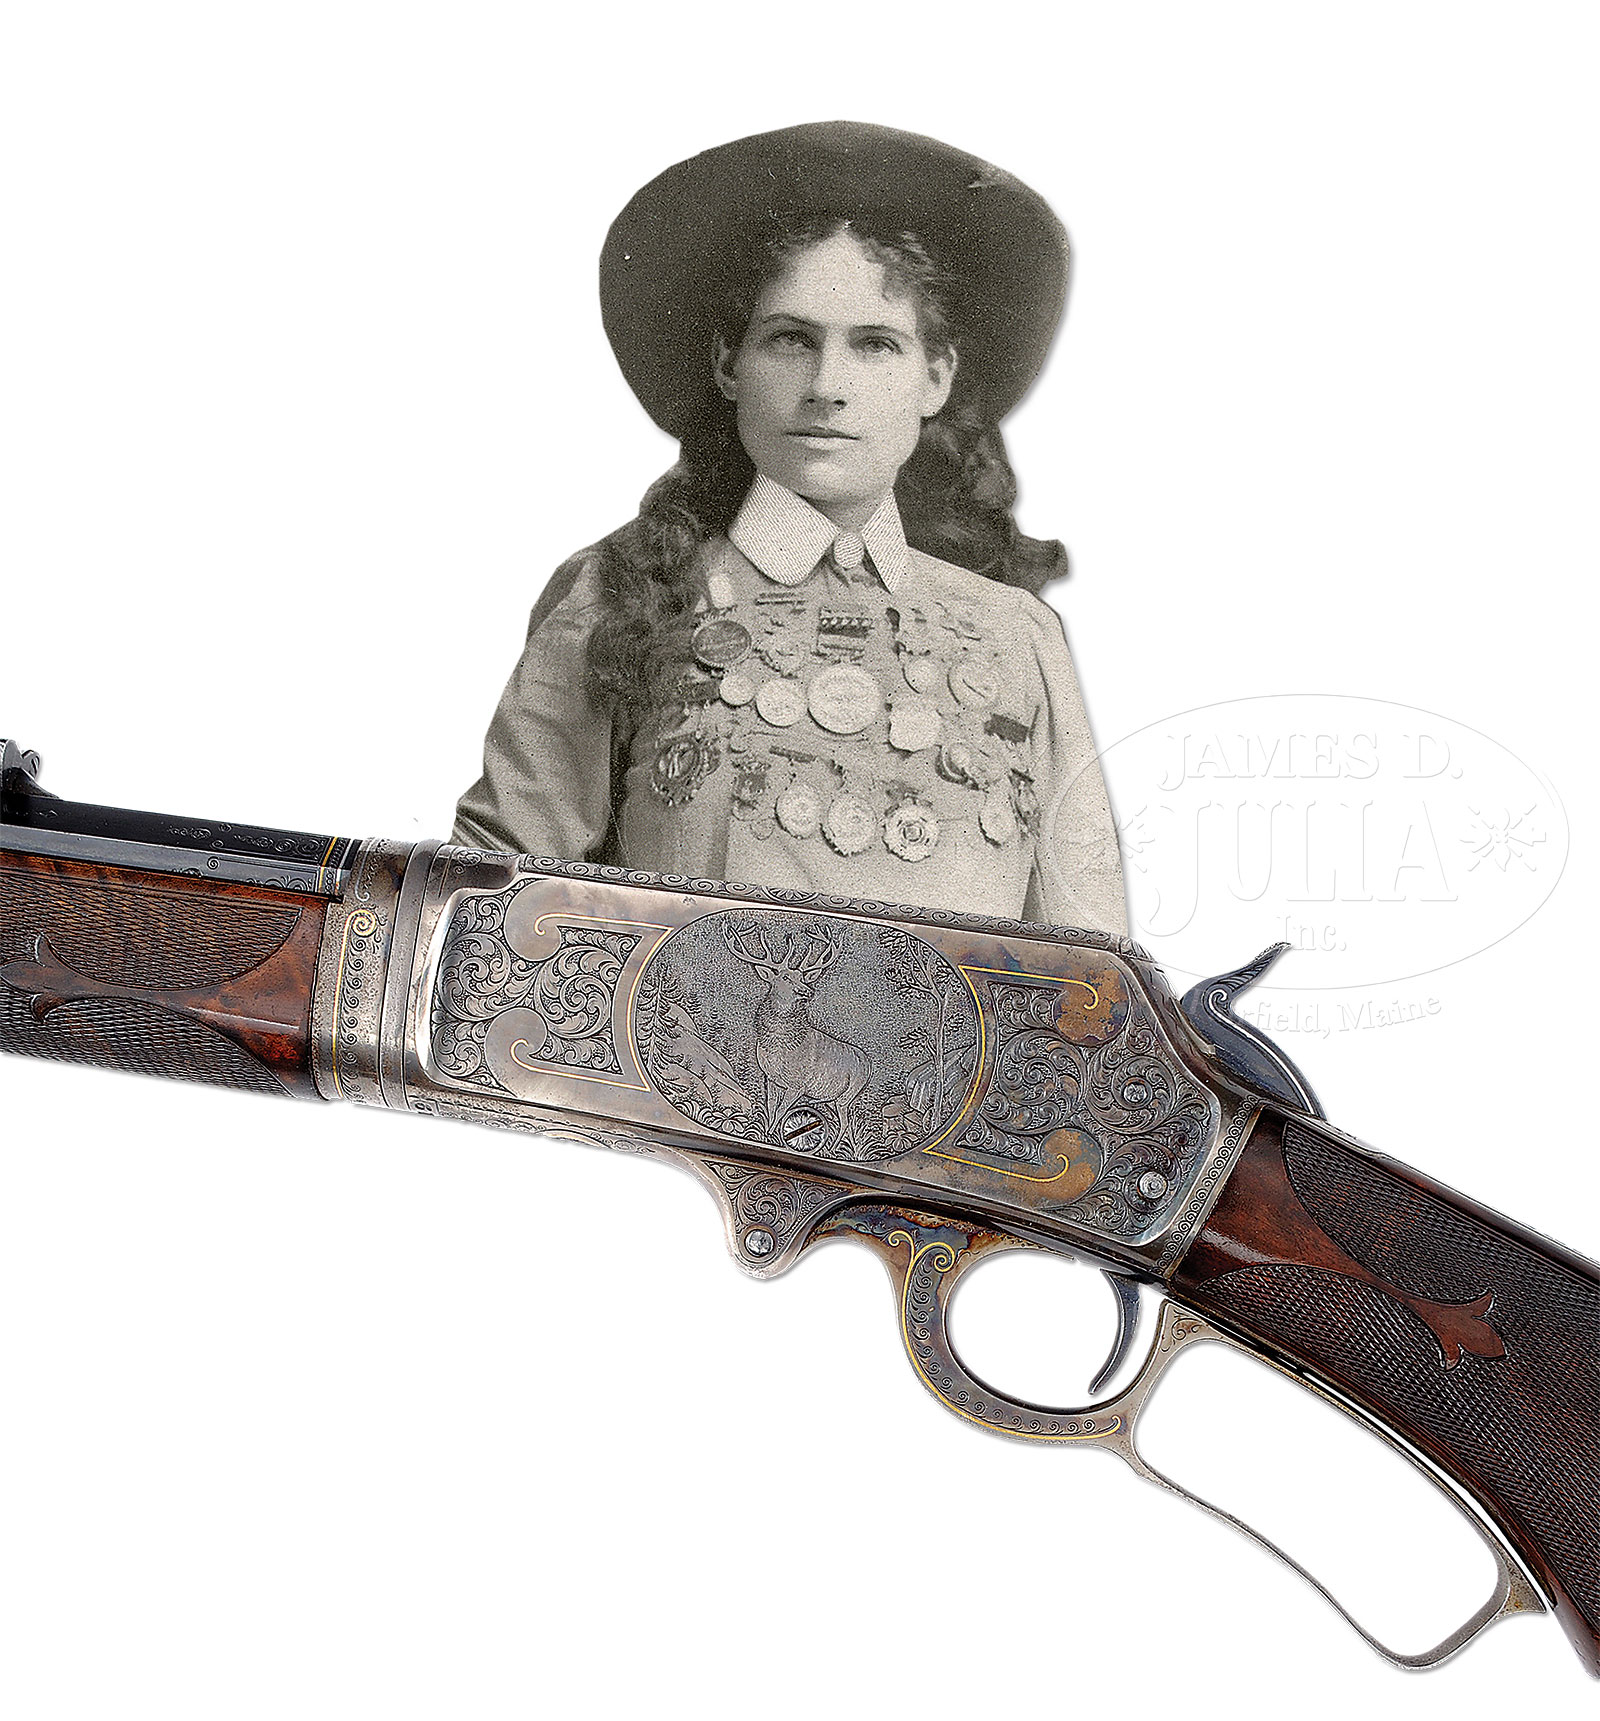 EXTRAORDINARY MARLIN ENGRAVED 1893 TAKEDOWN LEVER ACTION RIFLE WITH GOLD & PLATINUM INLAID DESIGN PRESENTED BY MARLIN TO ANNIE OAKLEY.